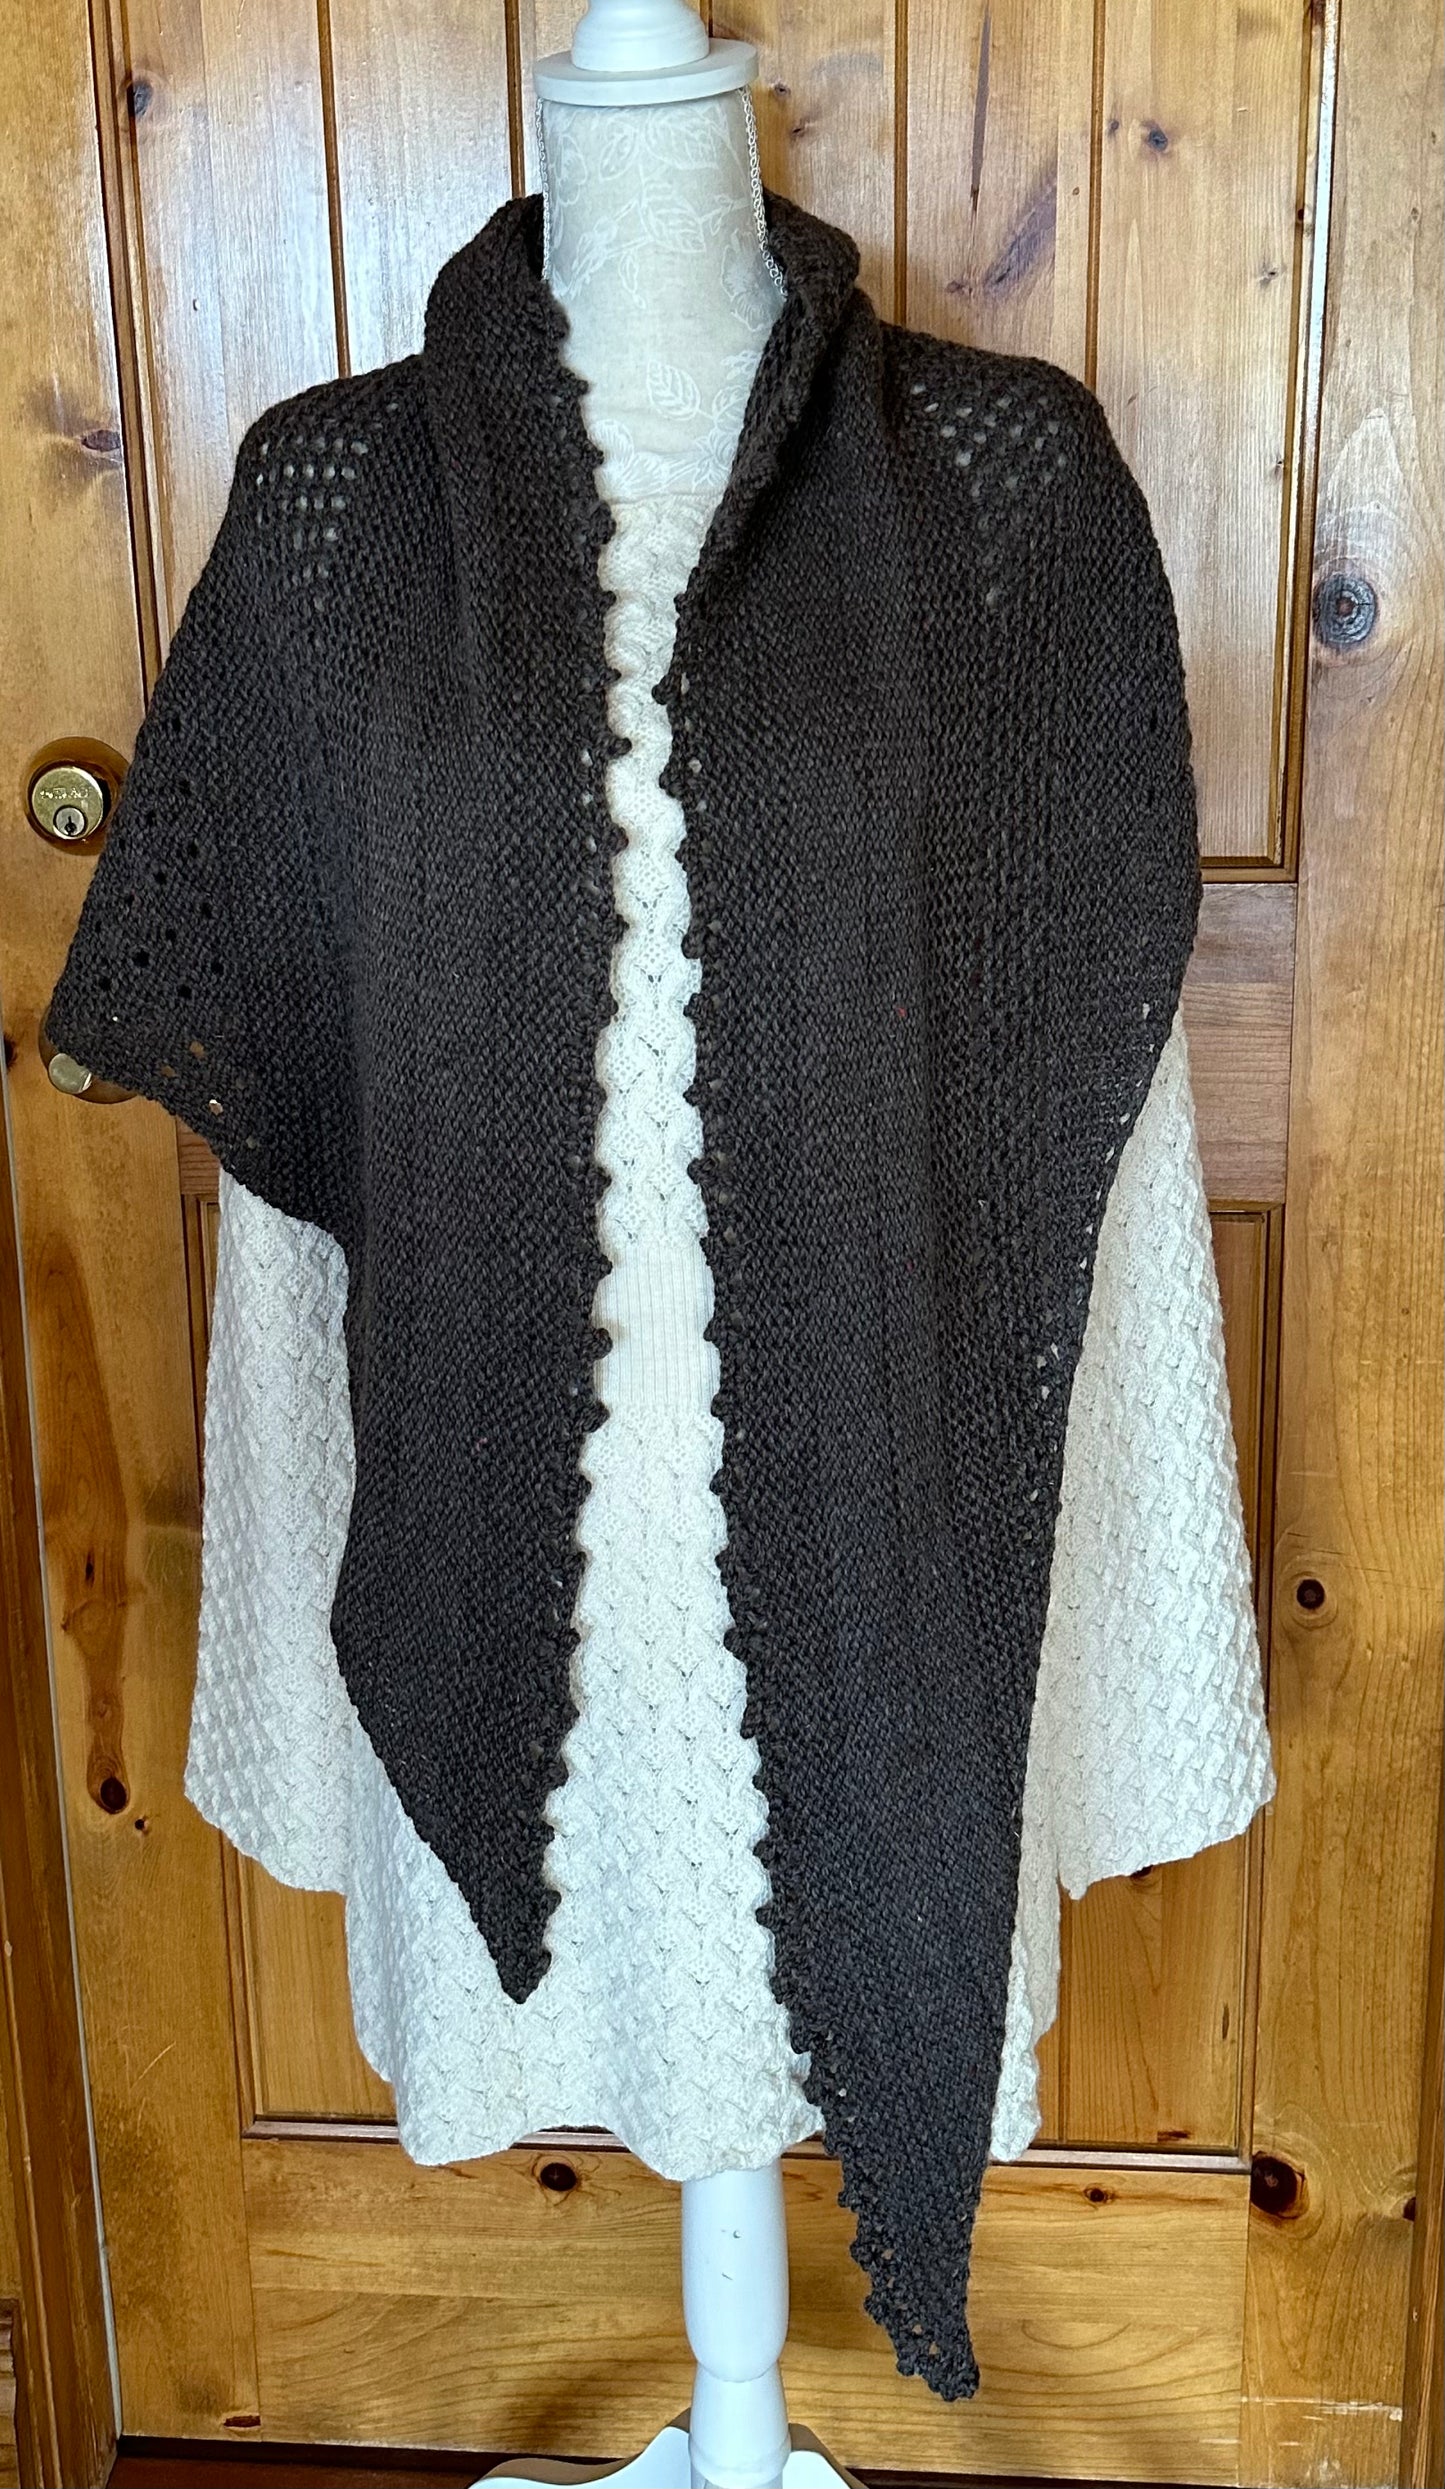 Shawl/Lace Scarf by Thorn